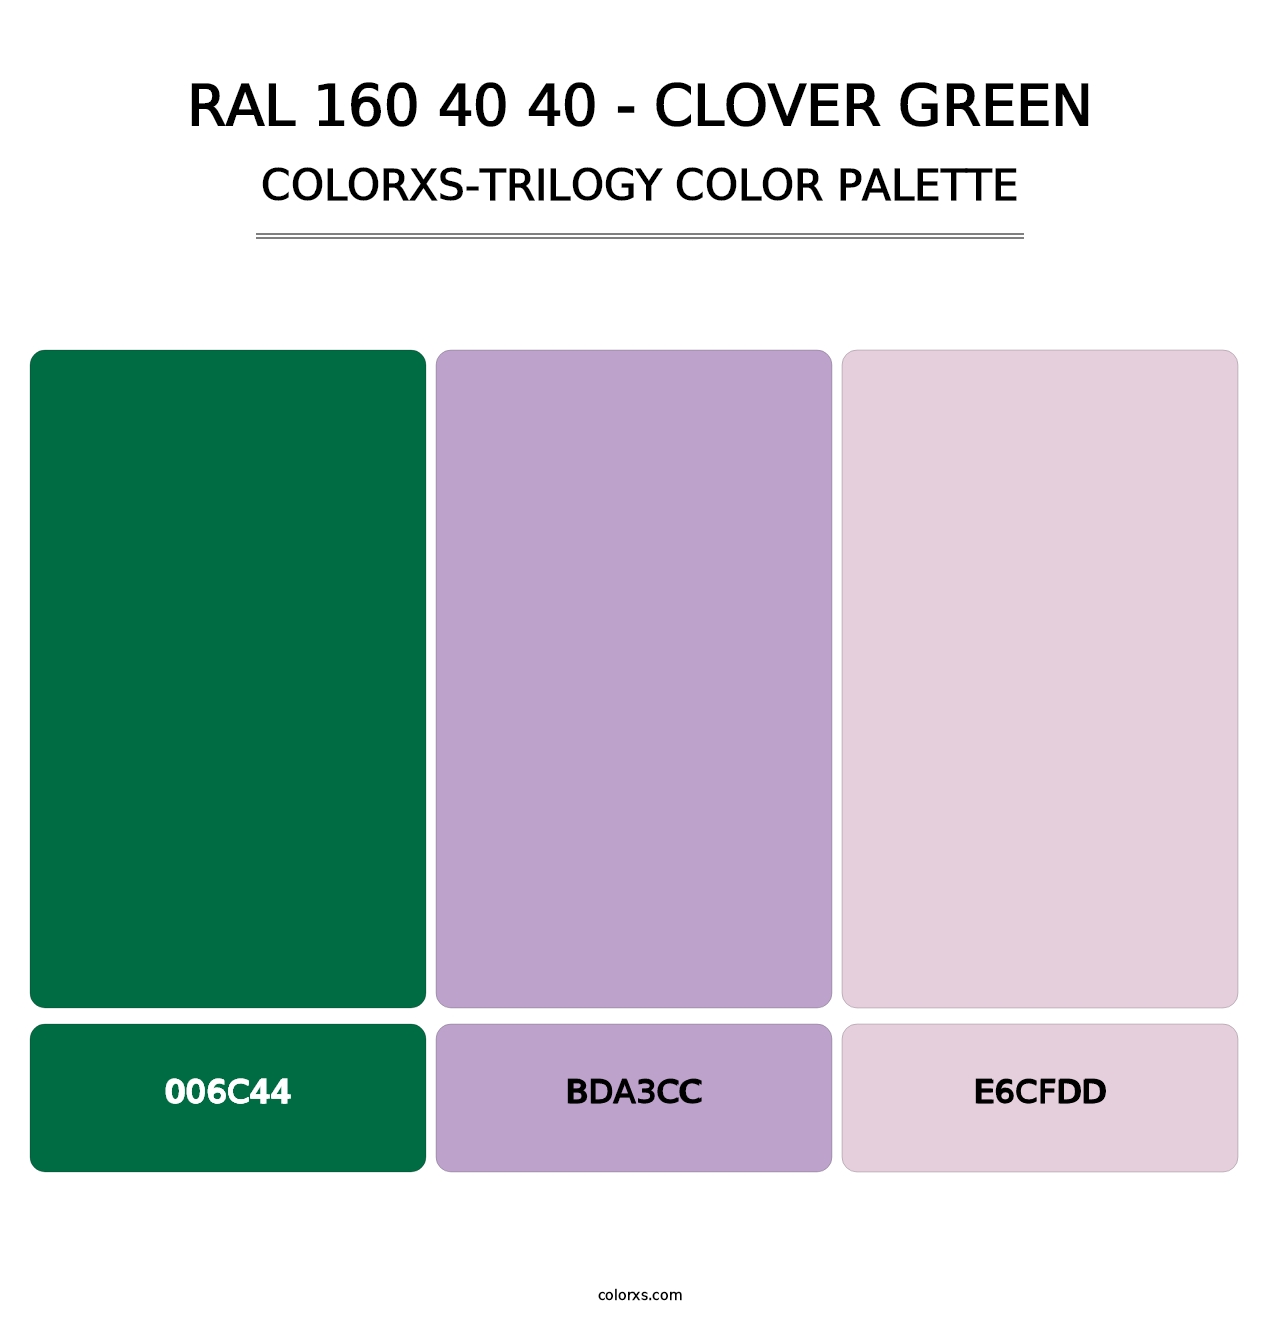 RAL 160 40 40 - Clover Green - Colorxs Trilogy Palette